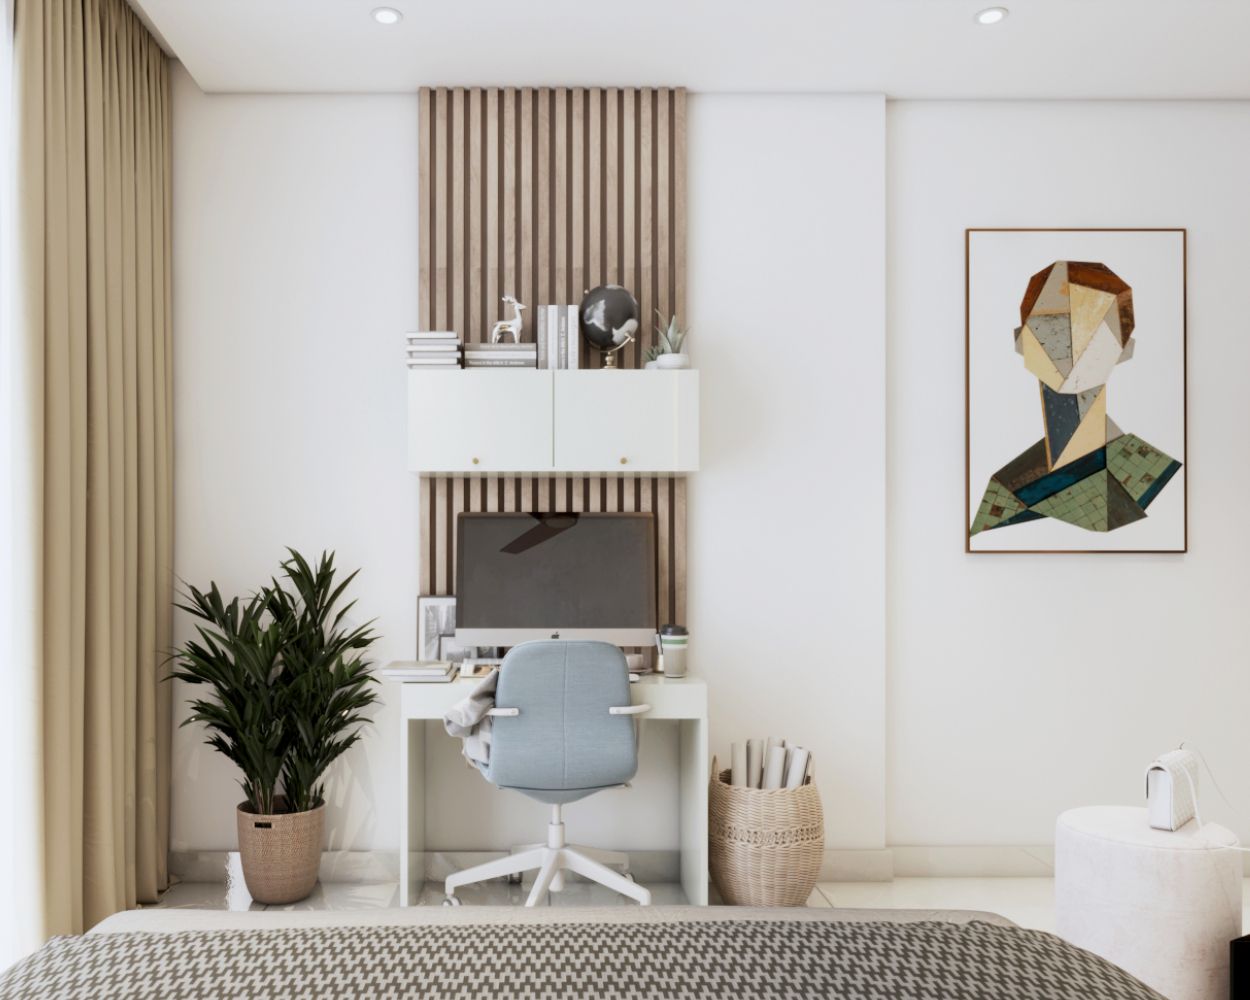 Modern Frosty White Study Room Design With Light Blue Swivel Chair